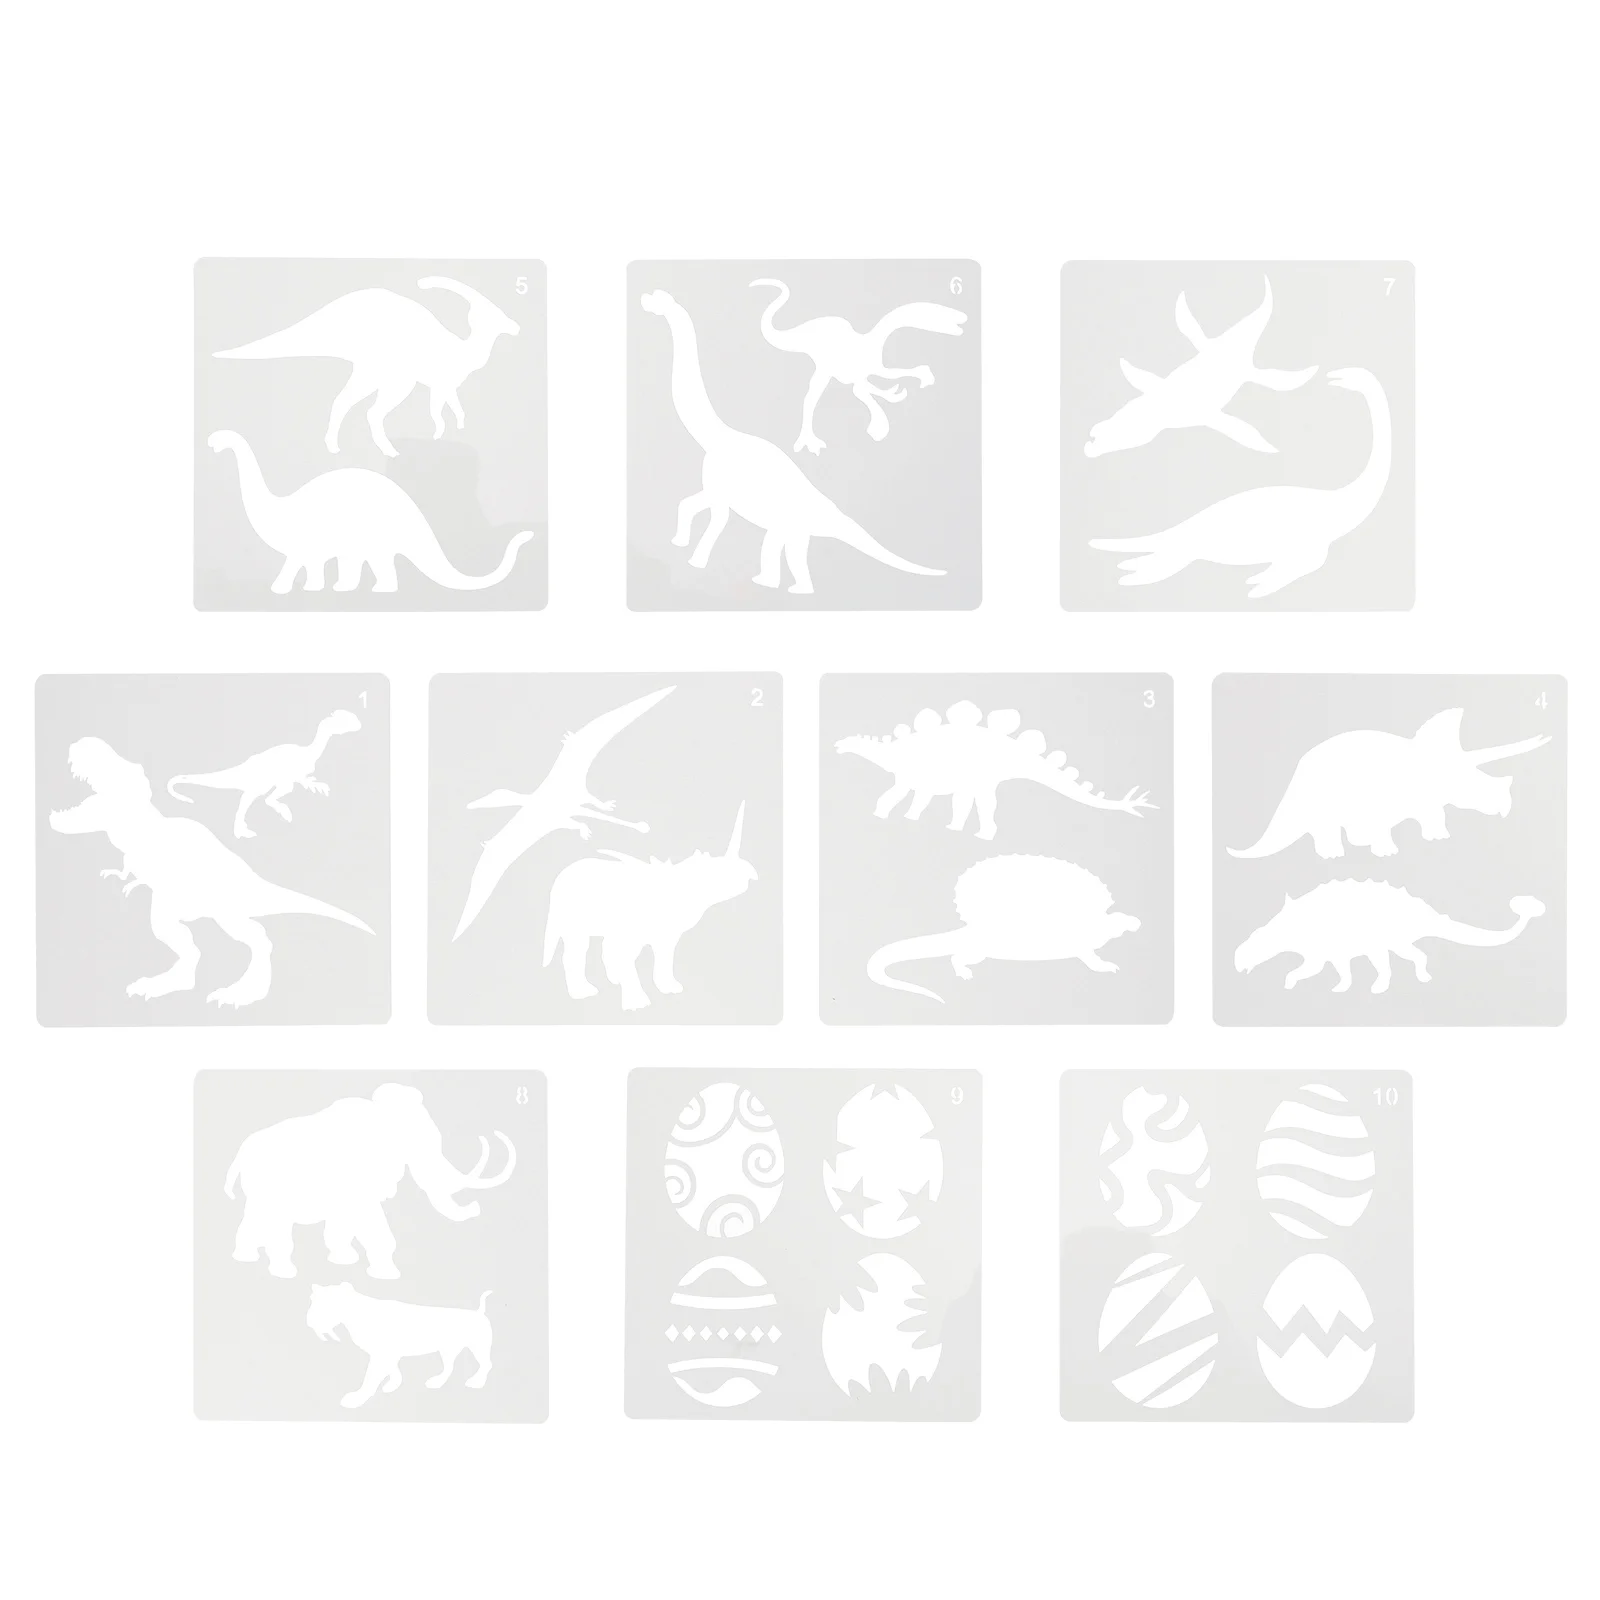 Dinosaur Template Crafts Stencils Painting Template Auxiliary Drawing Hollow Template Painting Supplies electrician drafting template design electrical drawing template k130 about 19 11cm